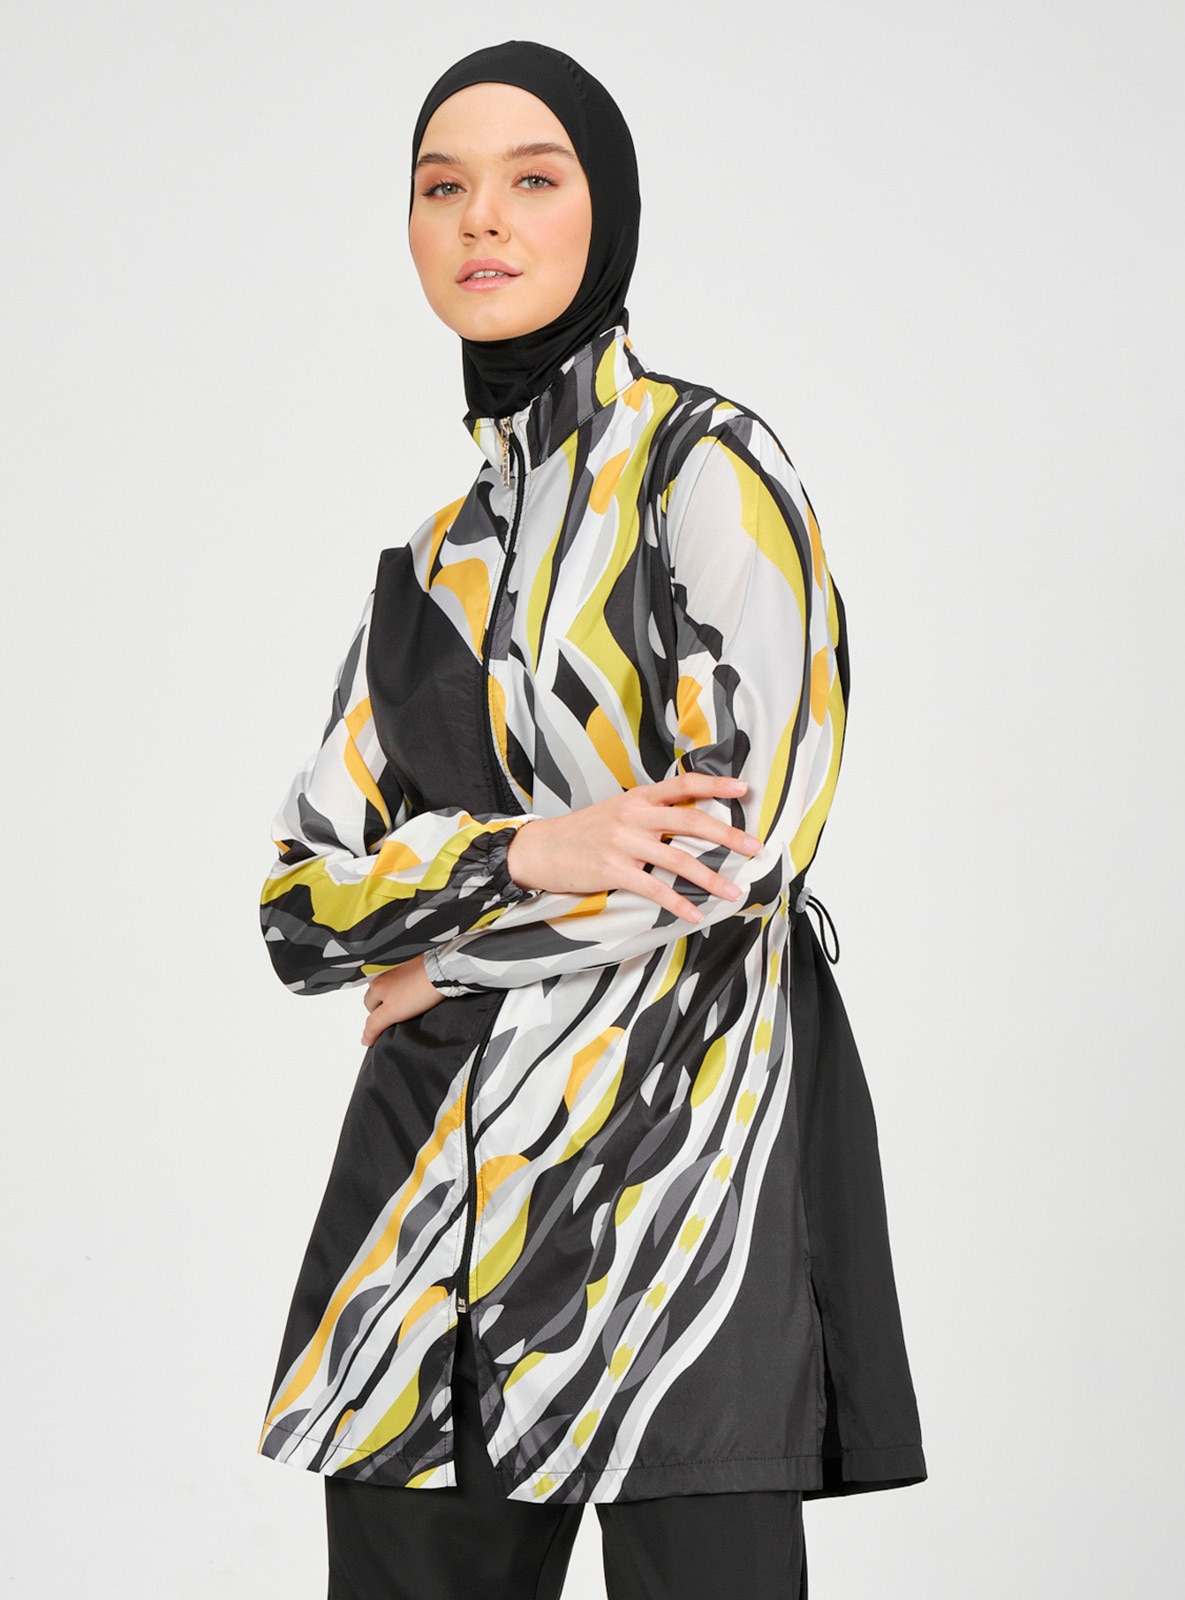 Fully Lined - Full Coverage Swimsuit Burkini